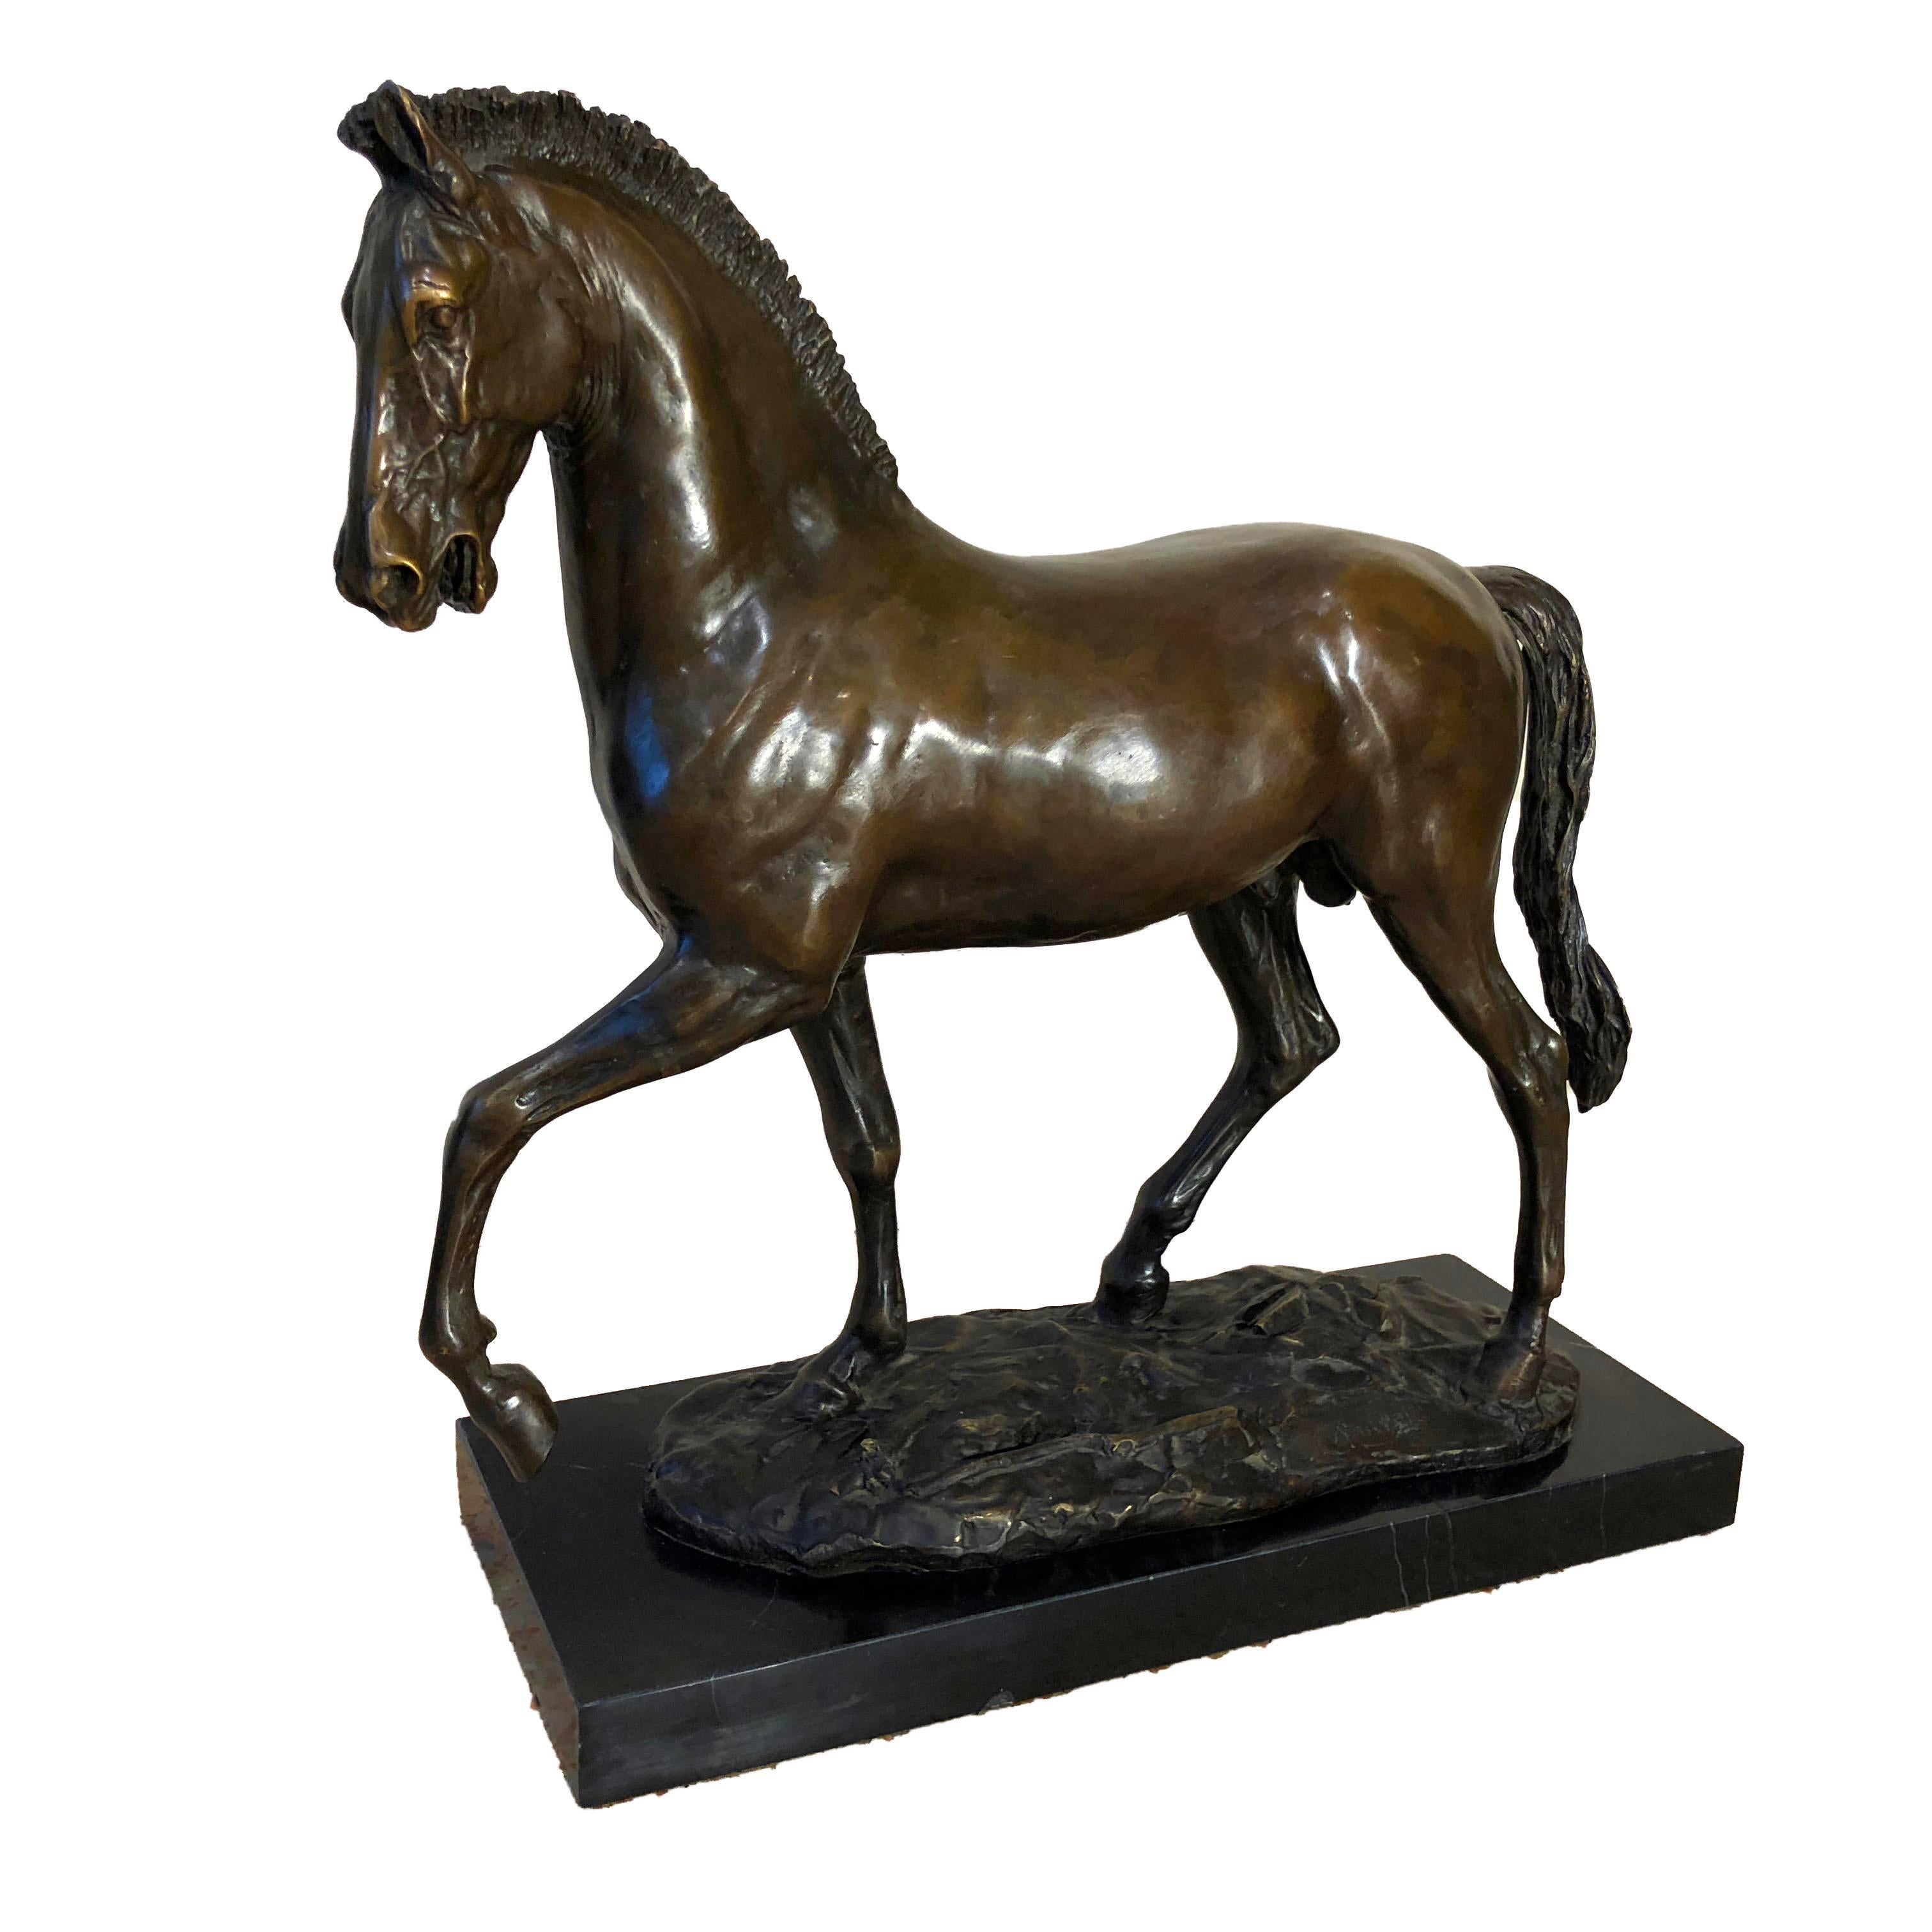 Bronze sculpture representing a Horse on a marble basis. It comes from France, from mid-19th century. It is signed Barye at the bottom near the hind left leg. It is in excellent conditions, no restoration needed. Size: 51 x 21 cm, 56 cm